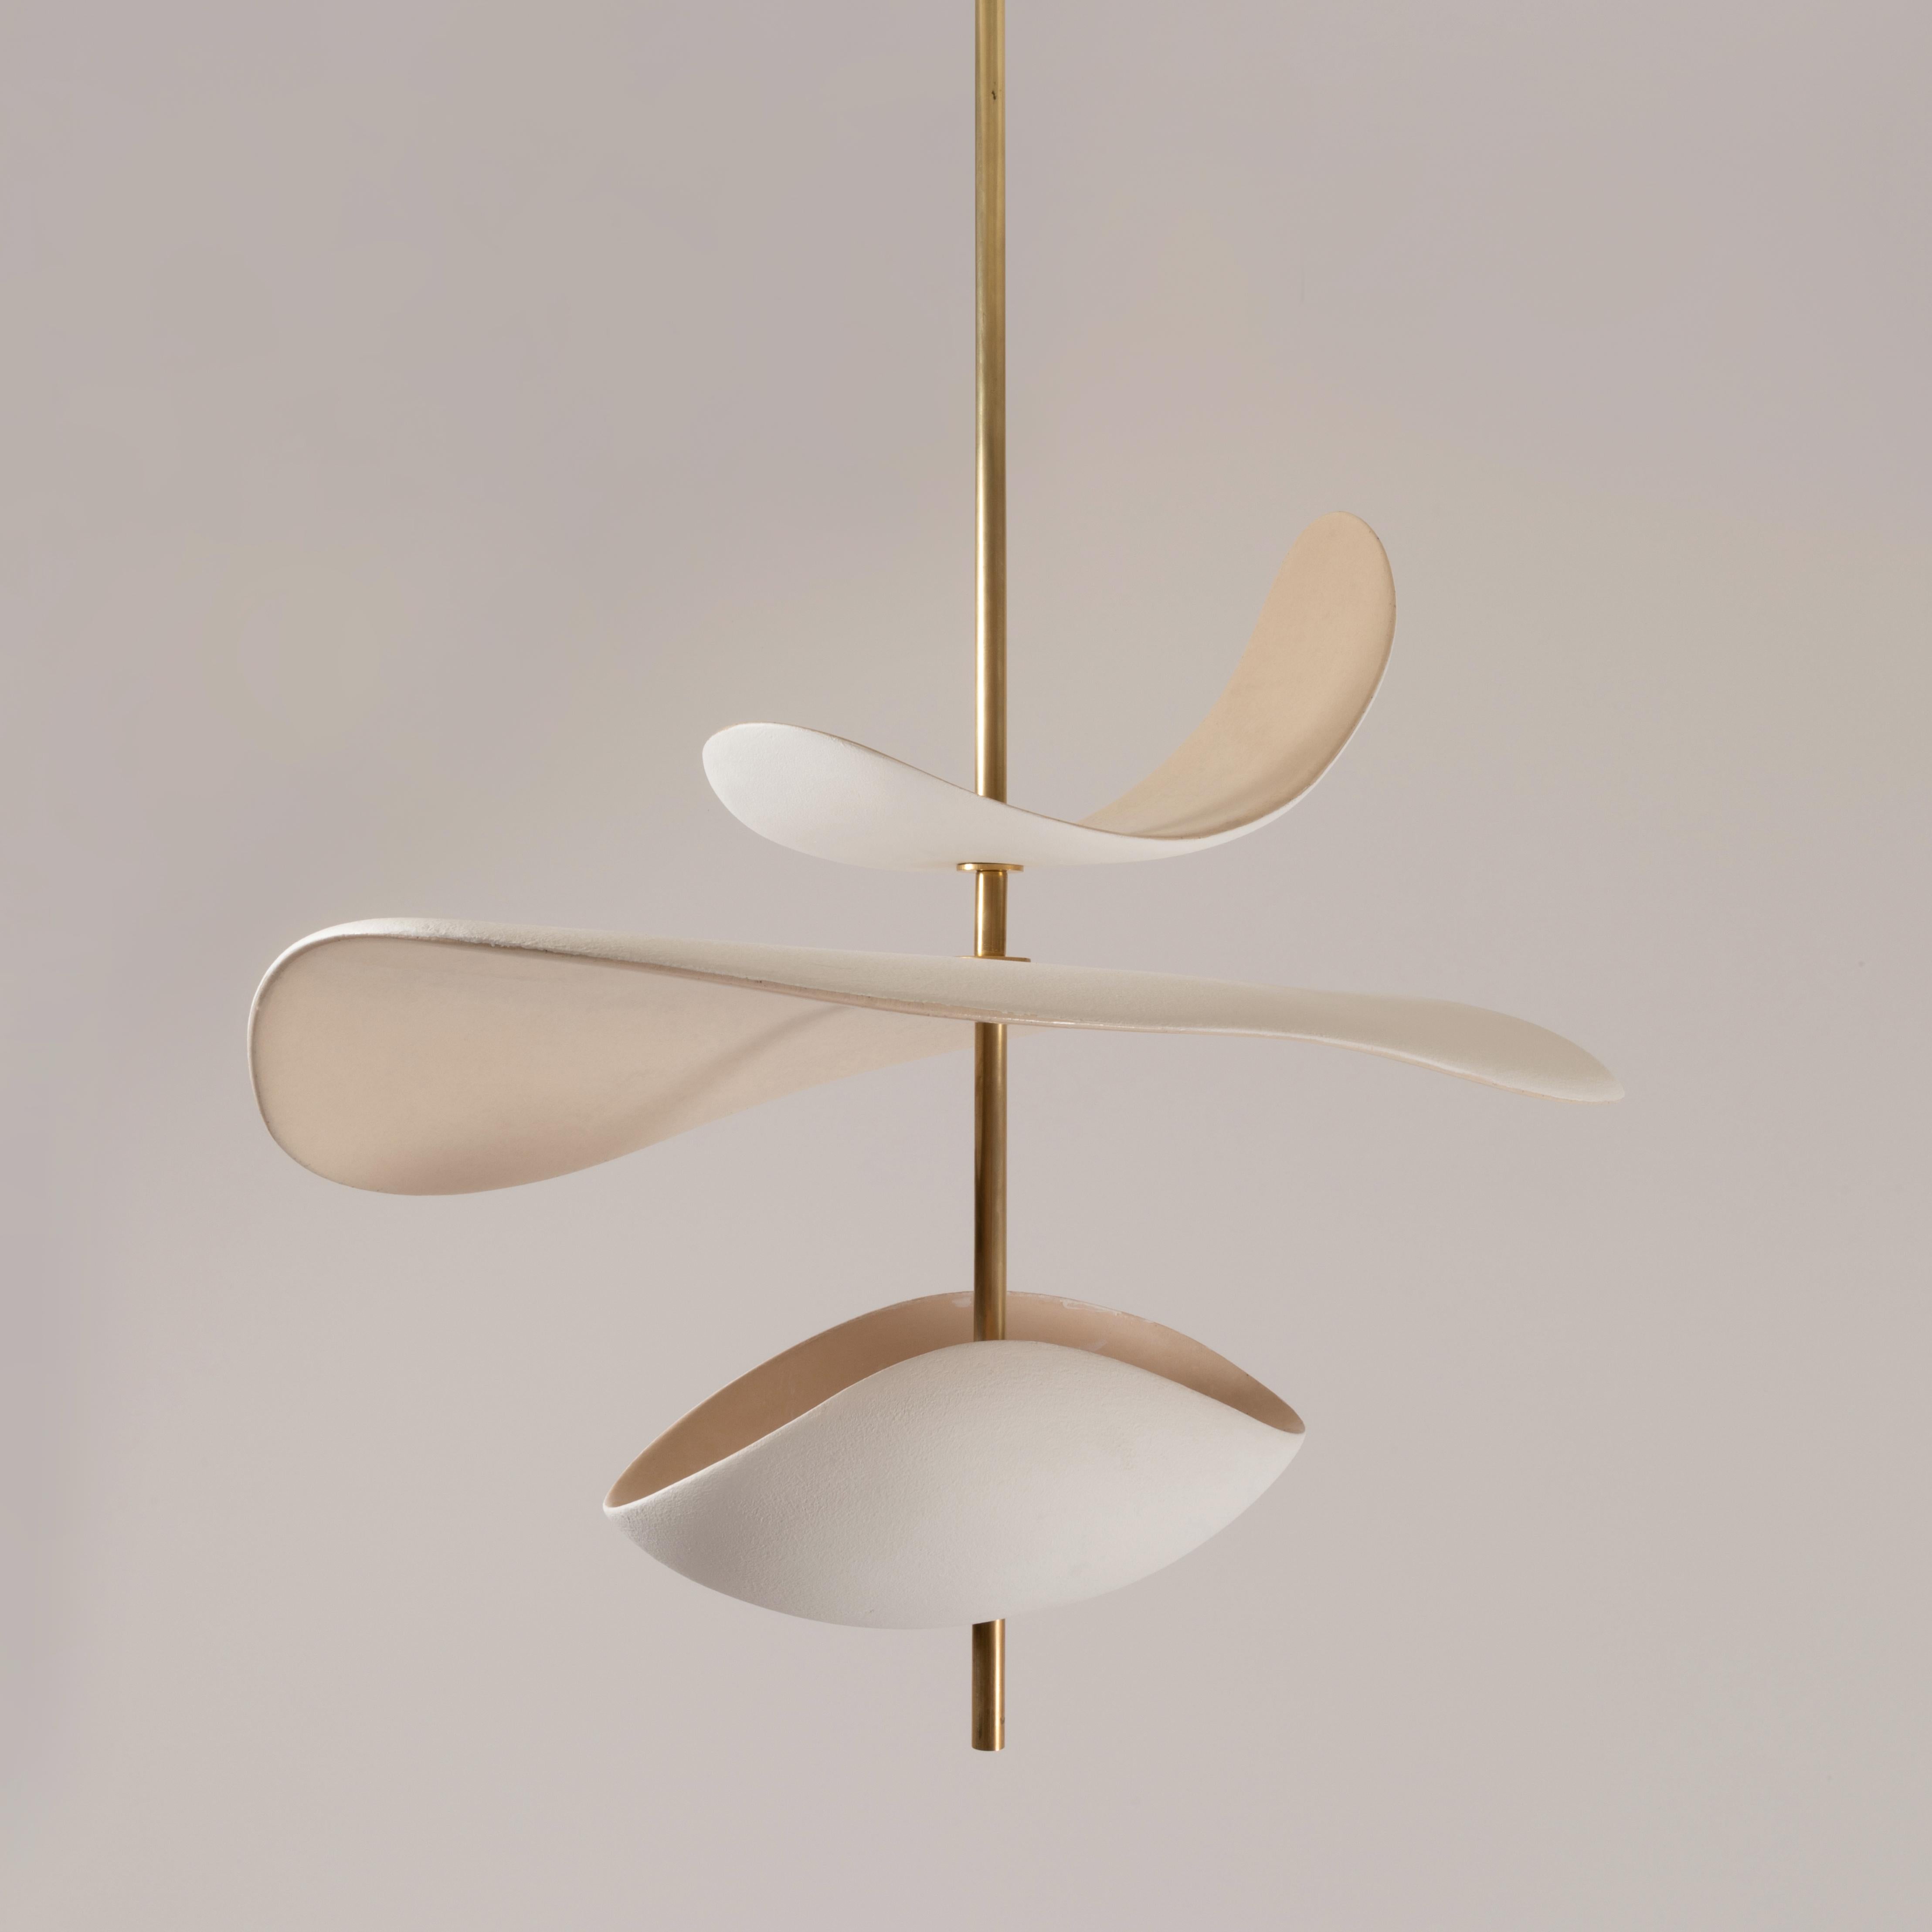 Antigone XL Pendant Lamp by Elsa Foulon
Dimensions: D 75 x H 65 cm 
Materials: ceramic, brass
Unique piece
Also available in different options: bowl or cup (lower part).
The height is min 65 cm and customizable to the customer's size. 

All our